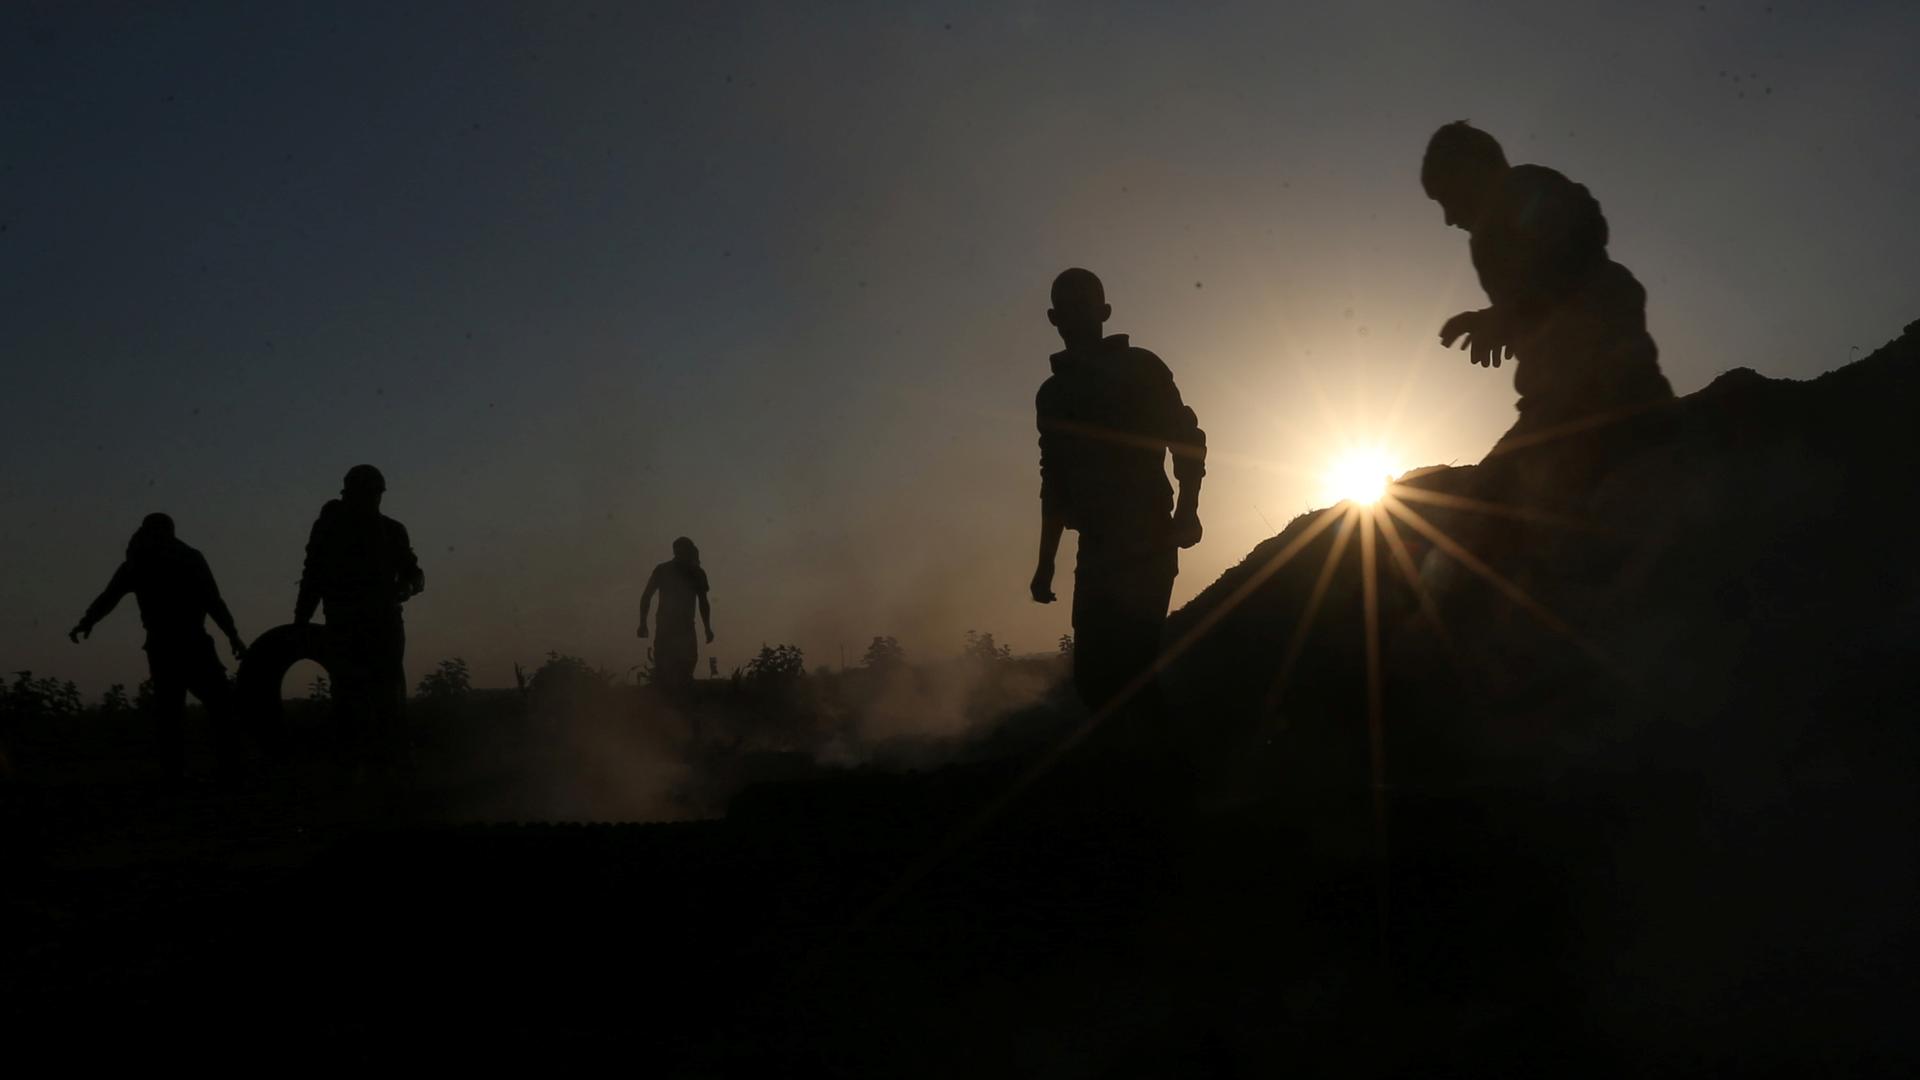 People are silhouetted against the sun as some smoke surrounds them. One man on the left rolls a tire.